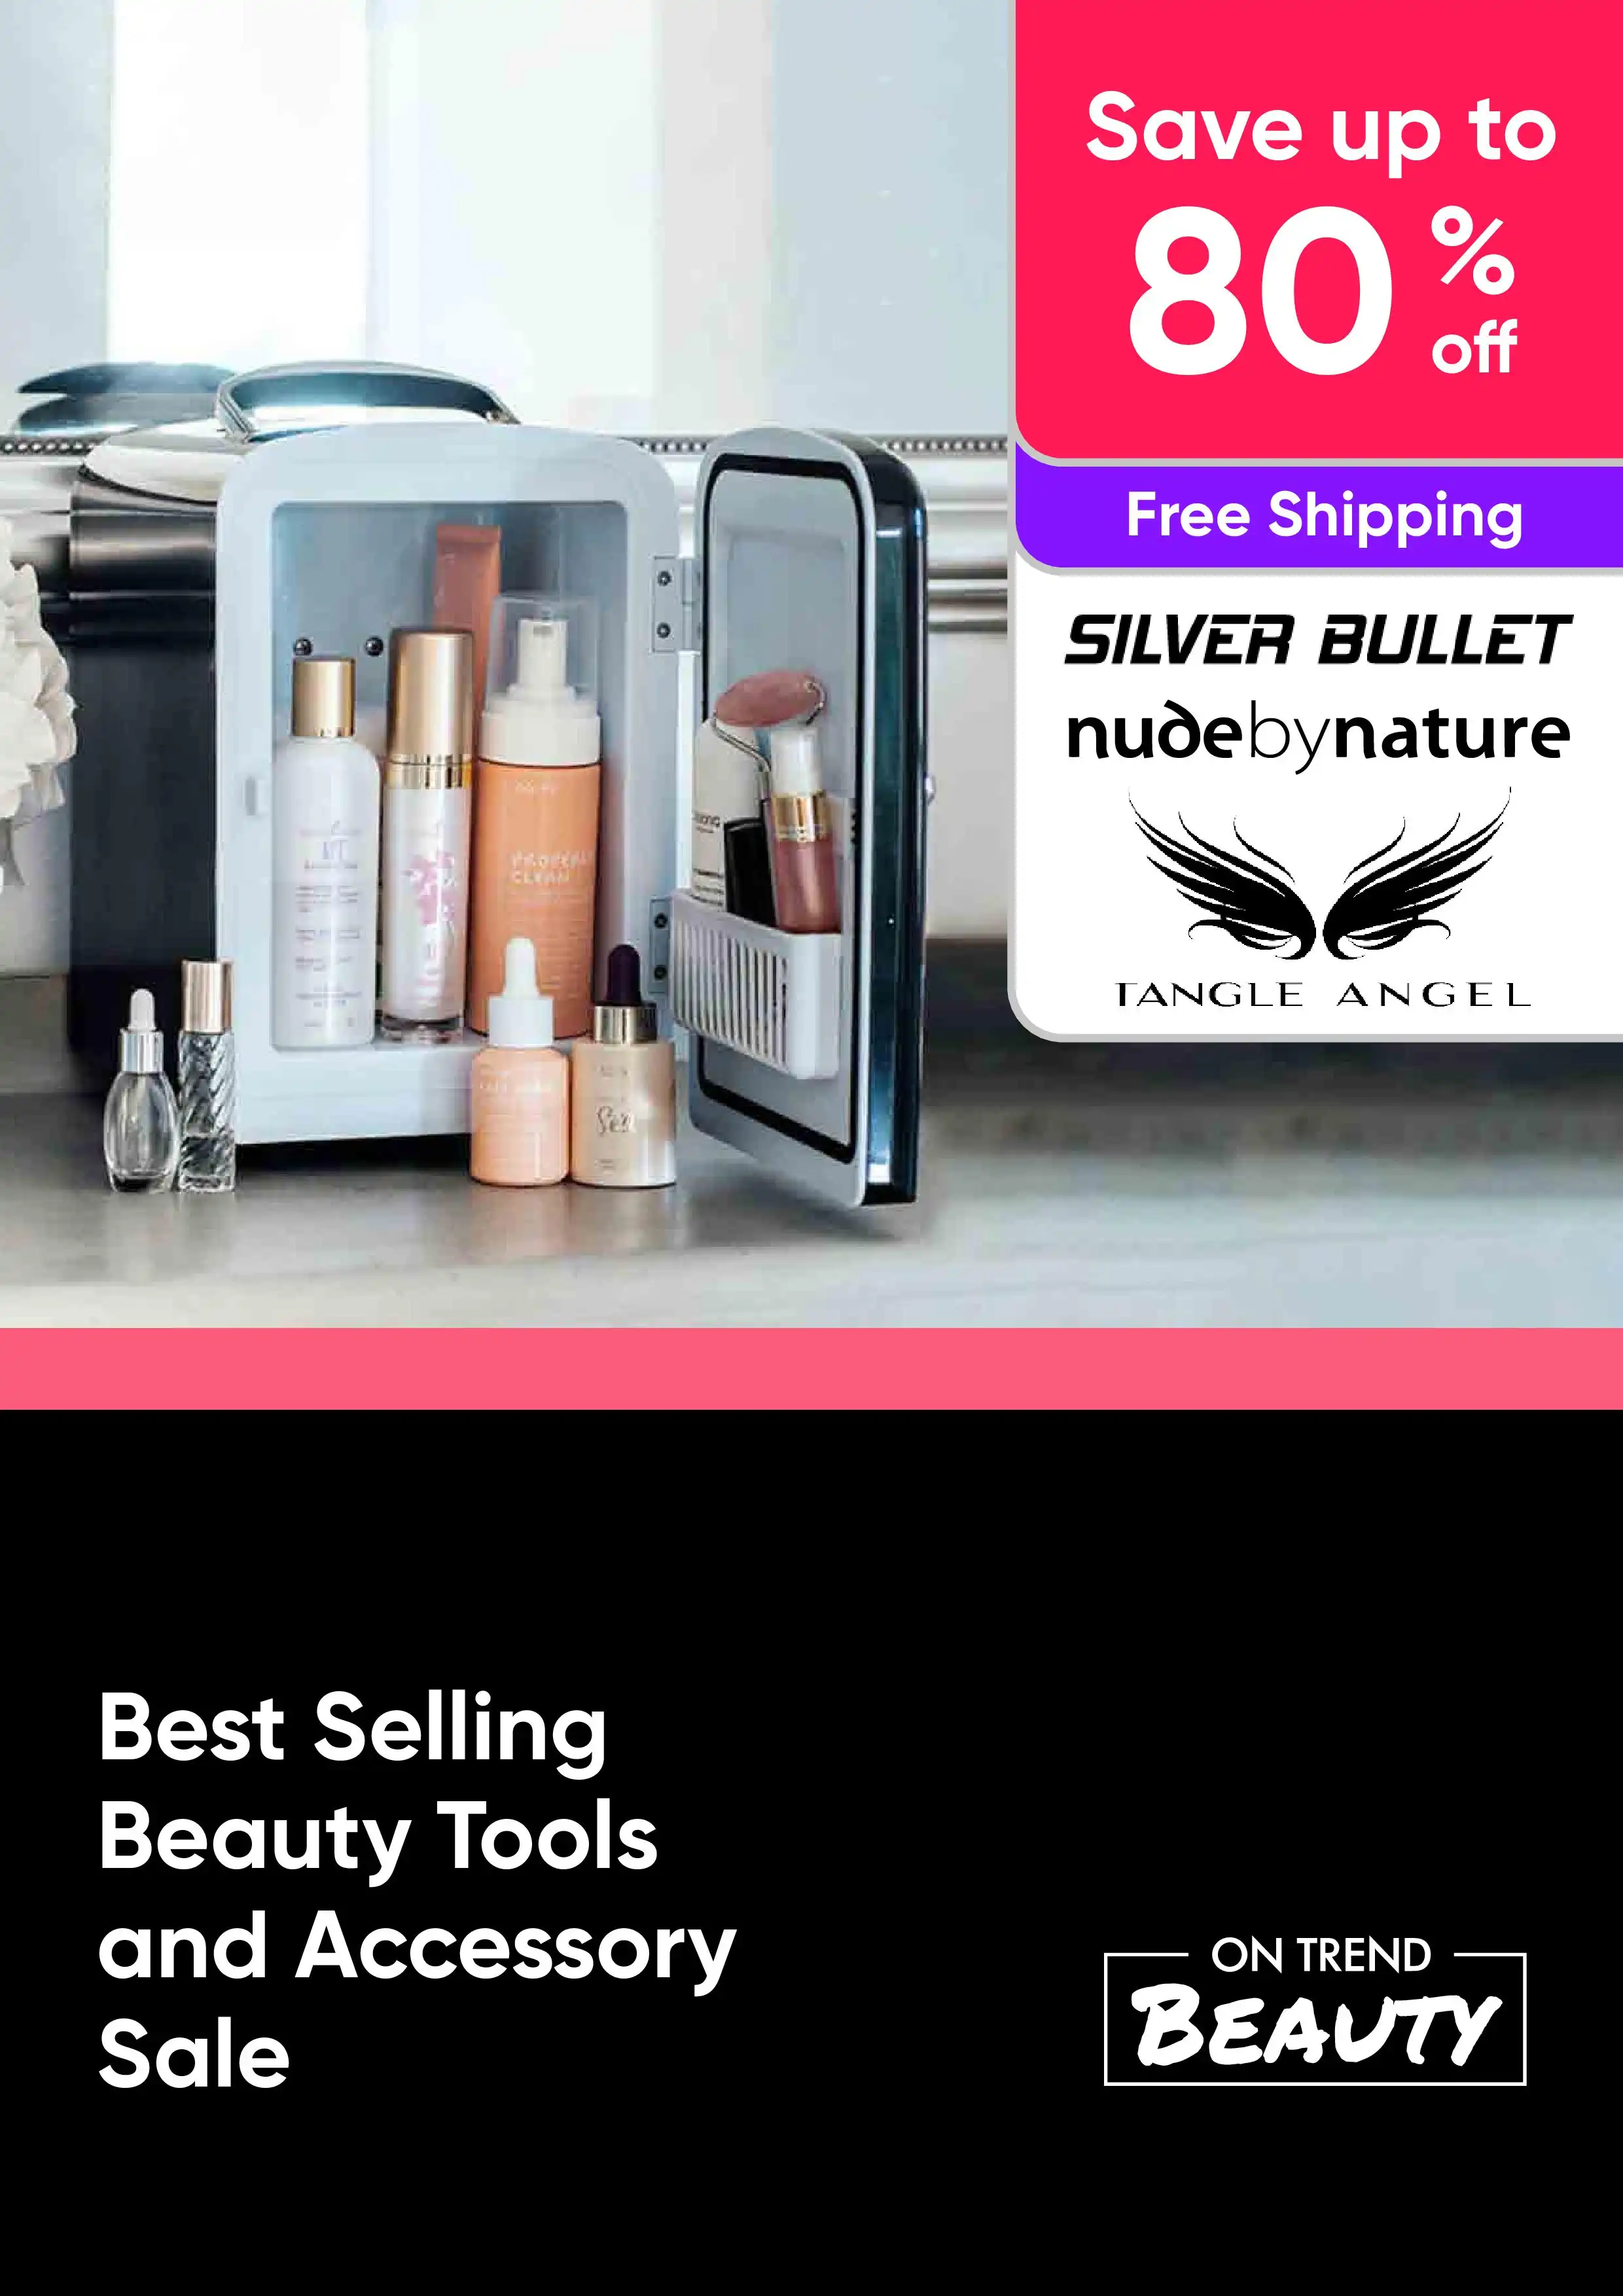 Best Selling Beauty Tools & Accessory Sale - Silver Bullet, Tangle Angel, Nude by Nature - Up To 80% Off